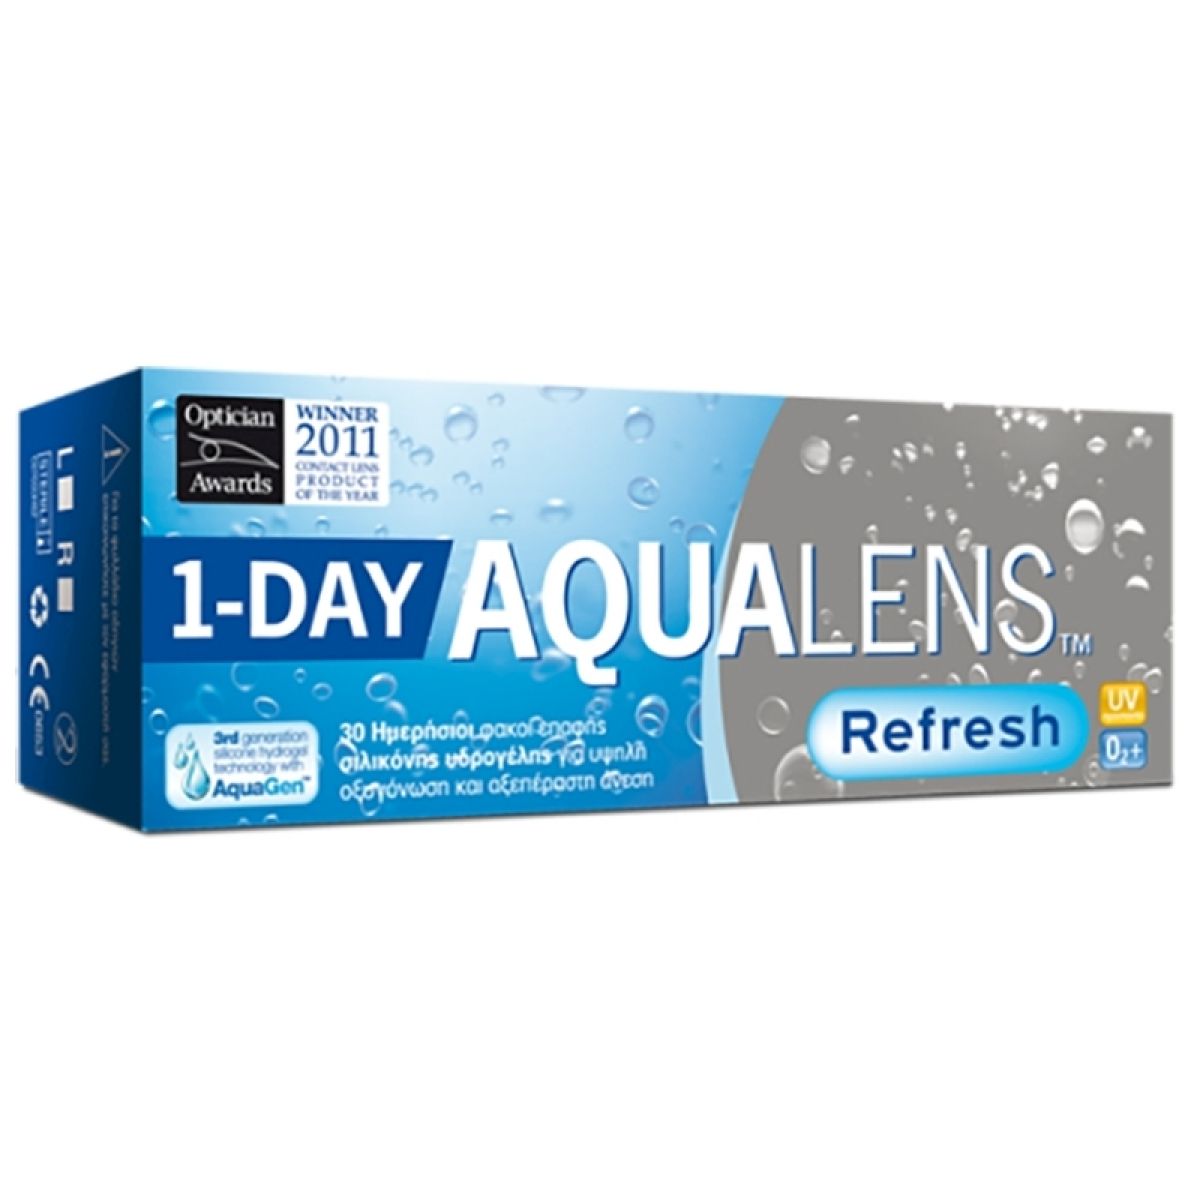 AQUALENS REFRESH 1DAY DAILY DISPOSABLE SILICON HYDROGEL CONTACT LENSES (30 LENSES+10 FOR FREE)